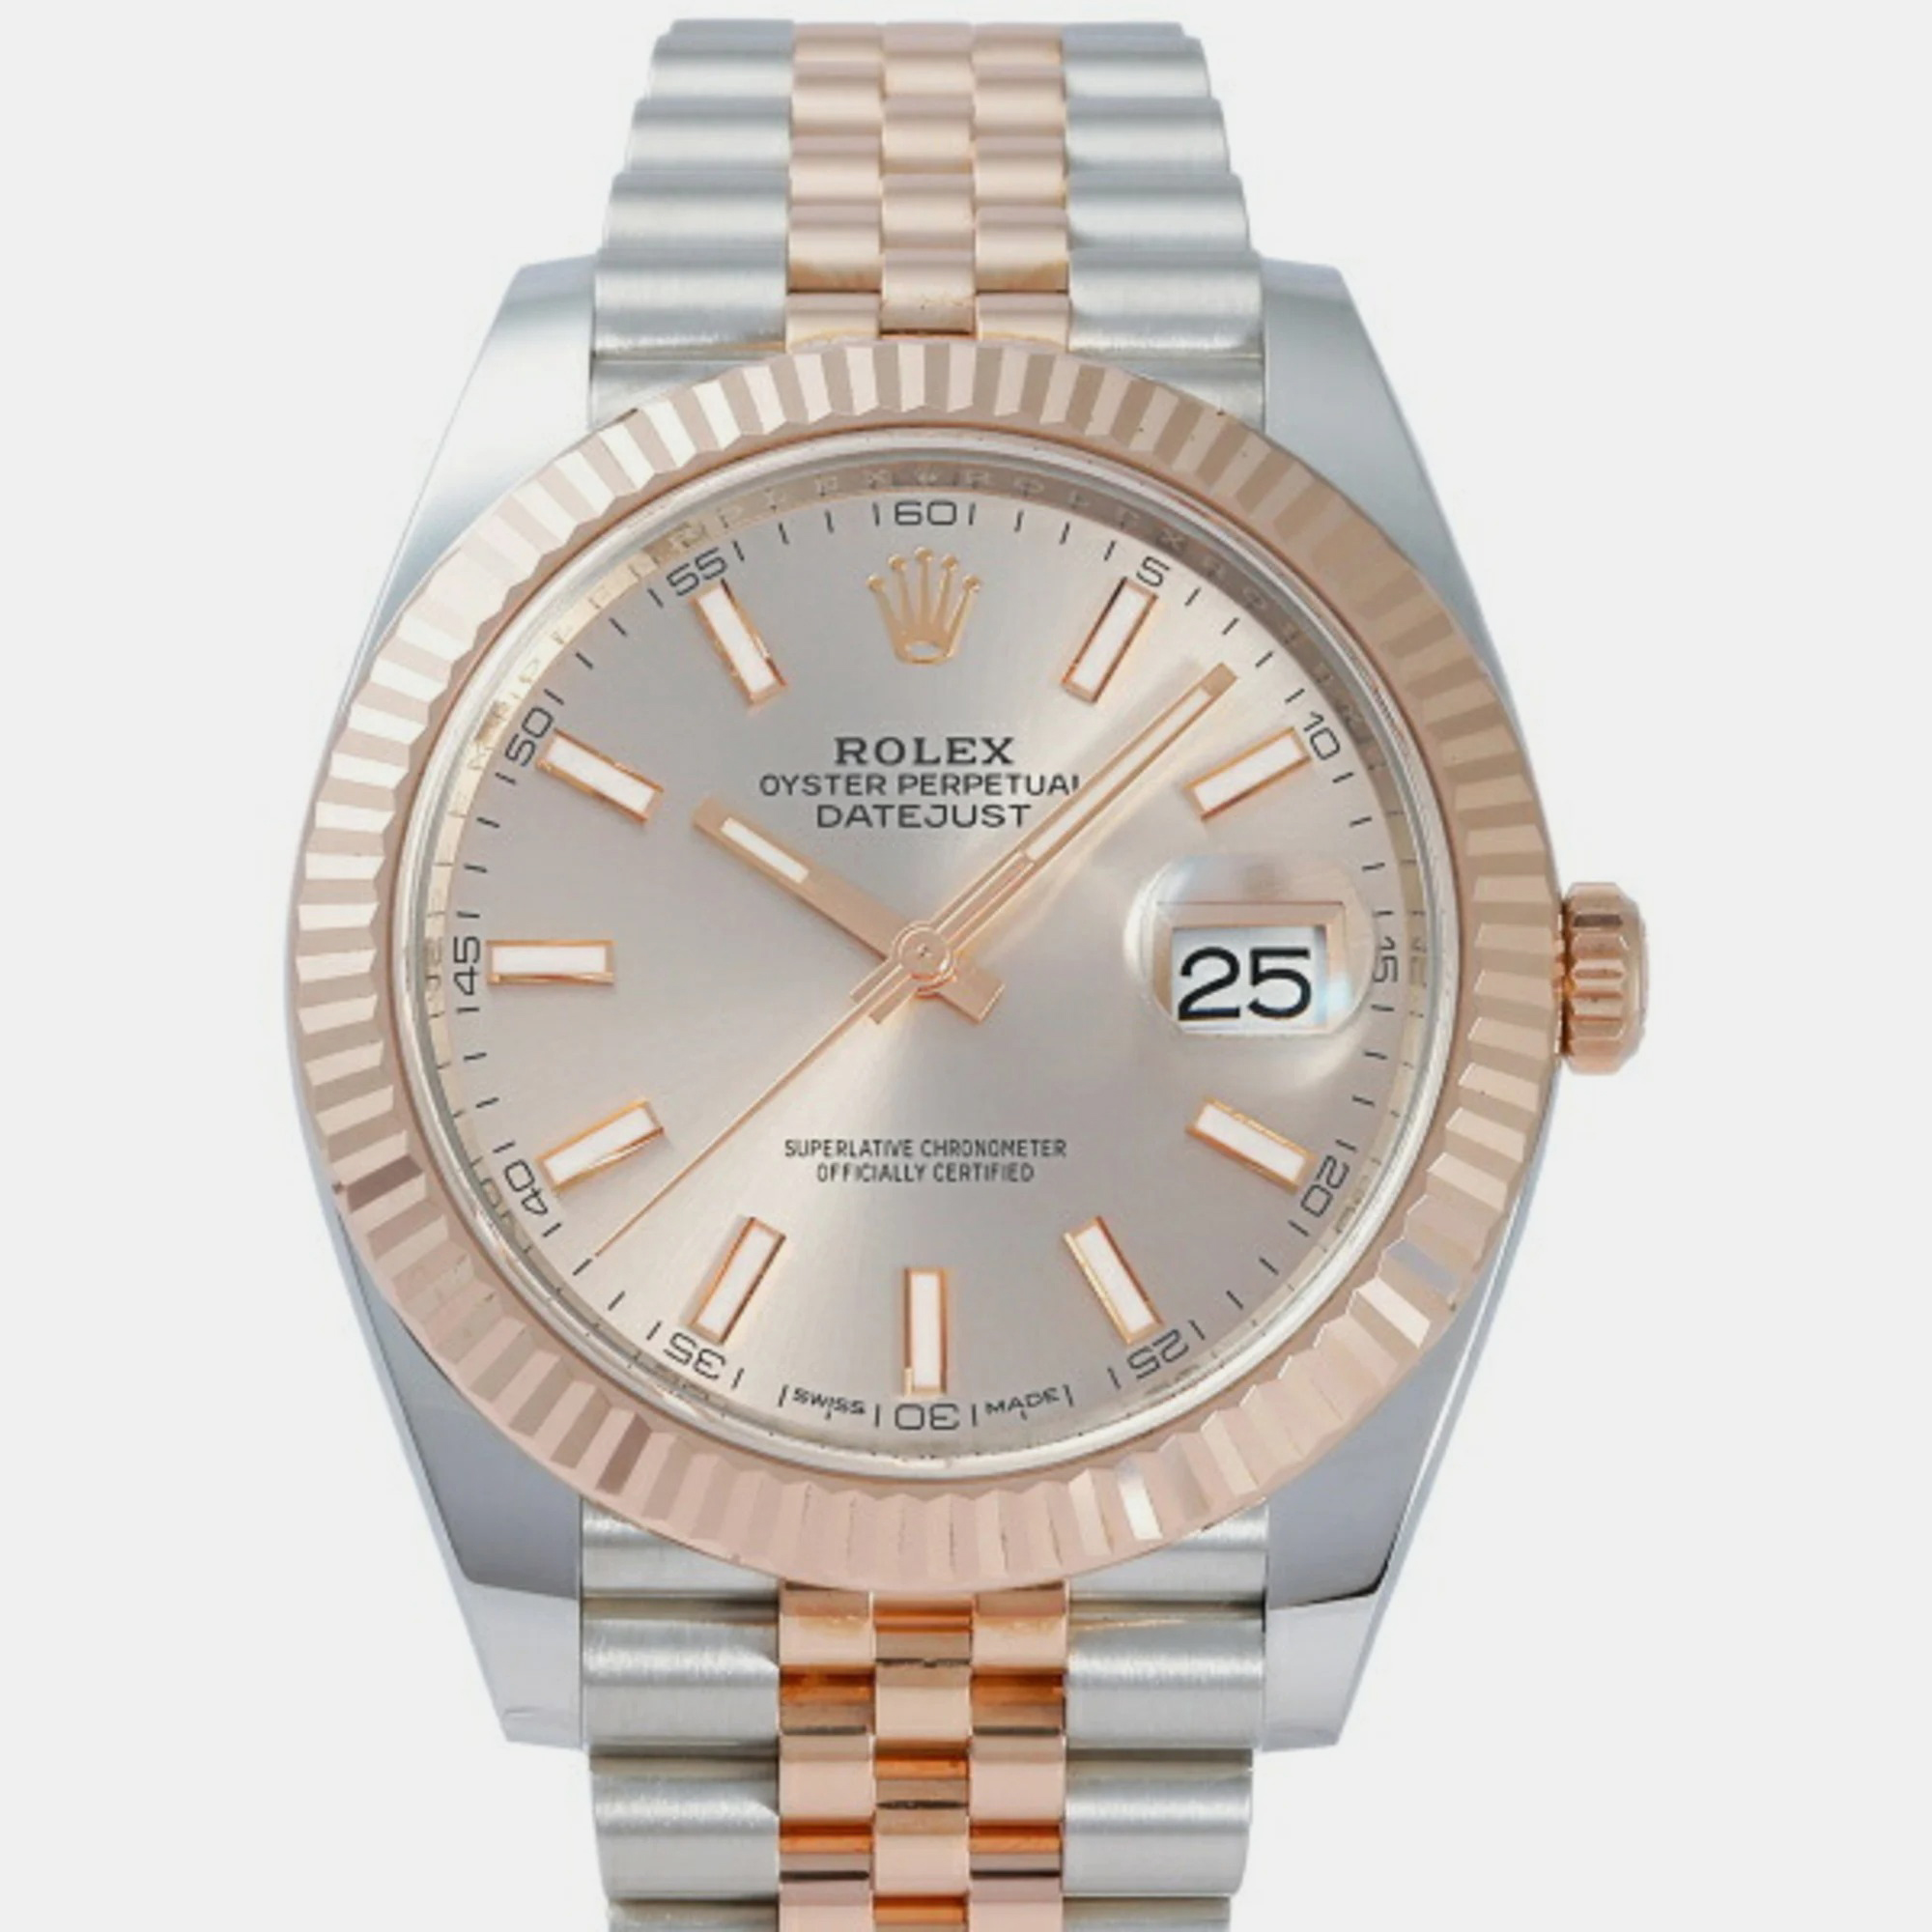 Rolex Sundust 18k Rose Gold And Stainless Steel Datejust 126331 Automatic Men's Wristwatch 41 Mm